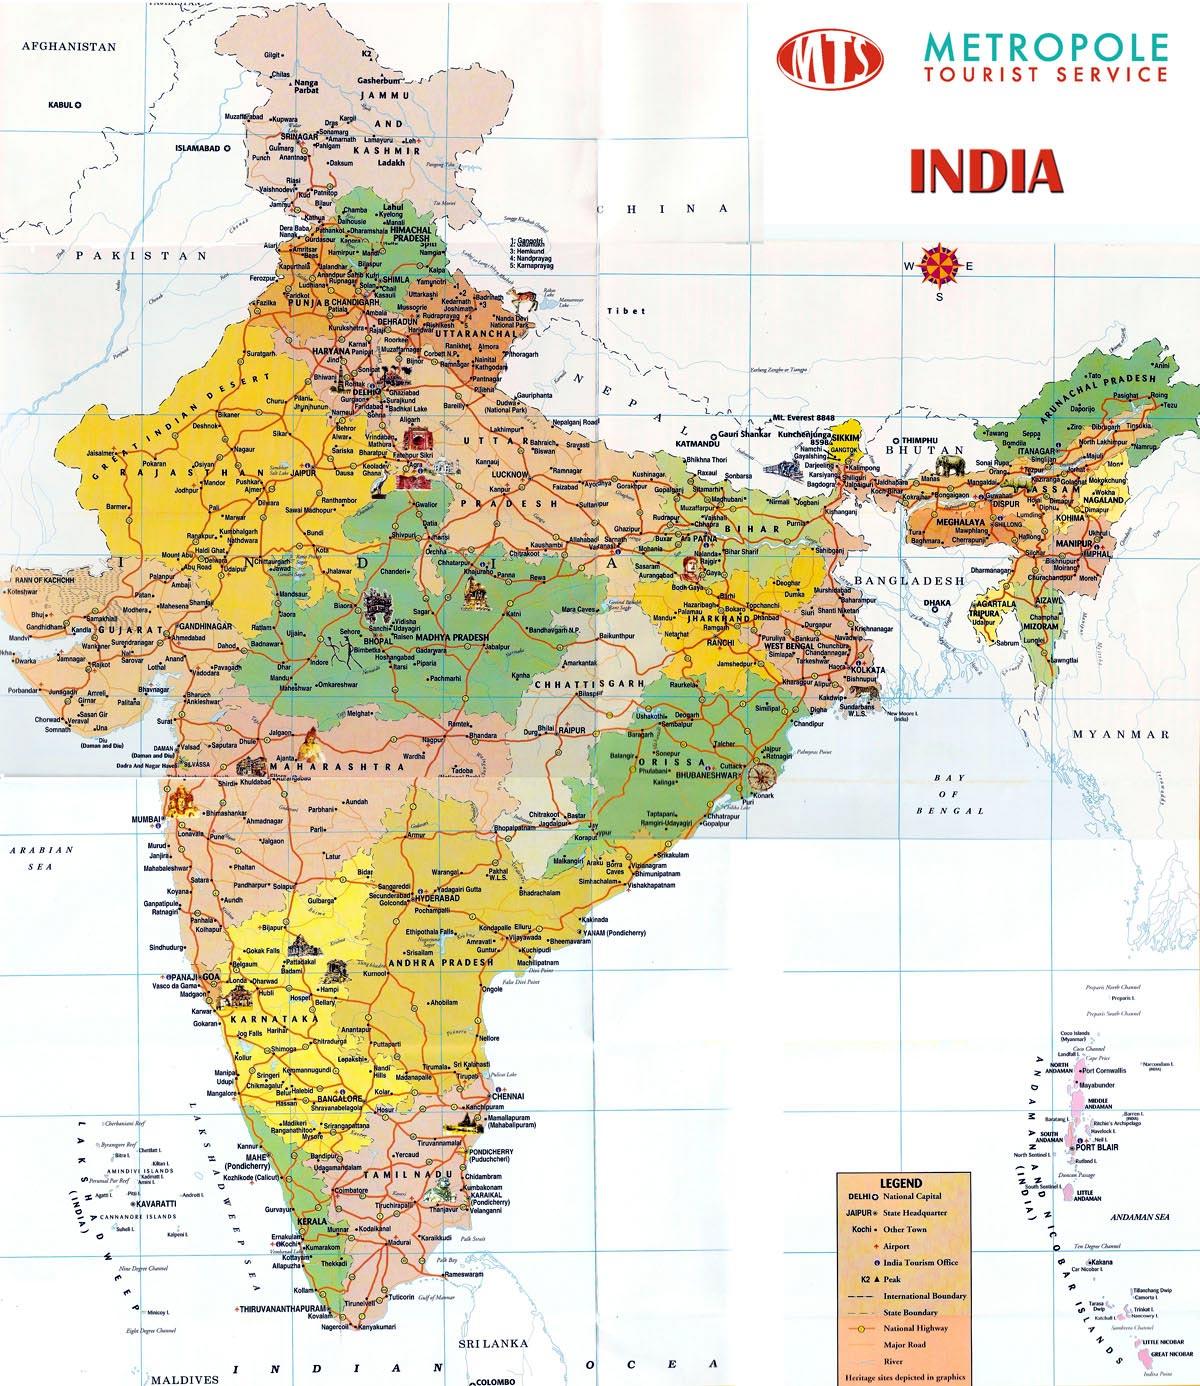 India Maps. Printable Maps of India for Download